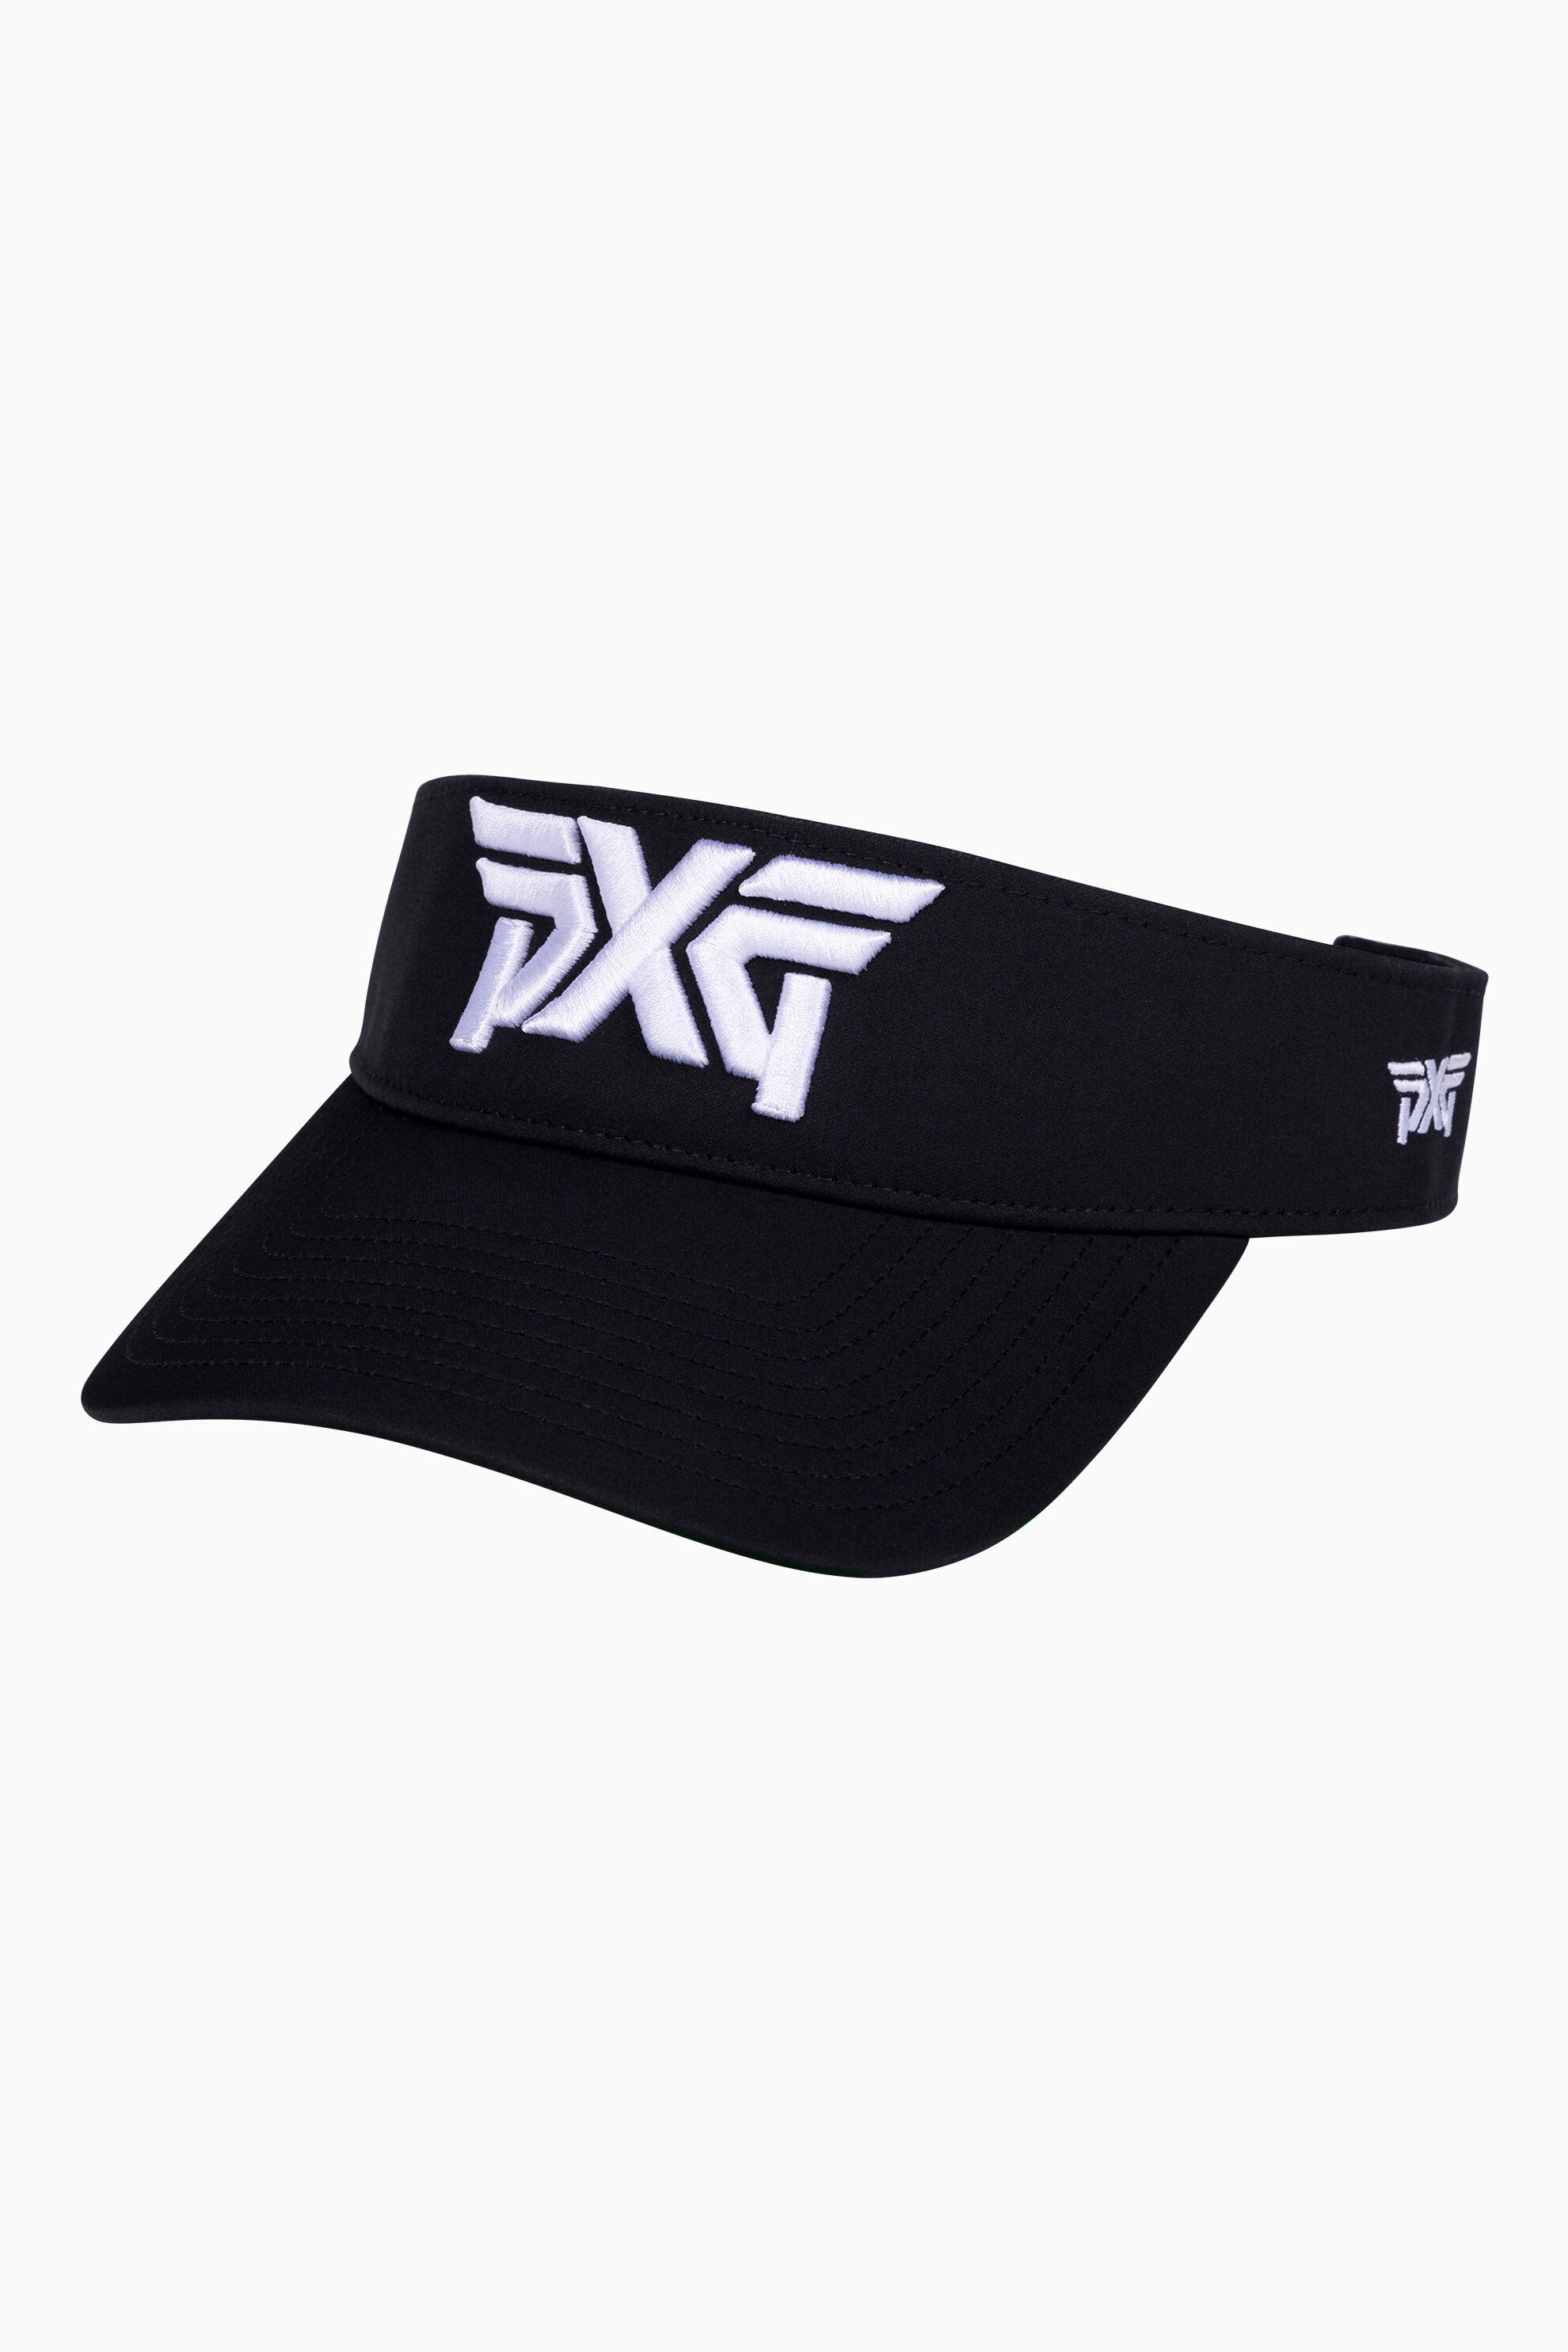 Sport Visor Shop the Highest Quality Golf Apparel, Gear, Accessories and Golf Clubs at PXG